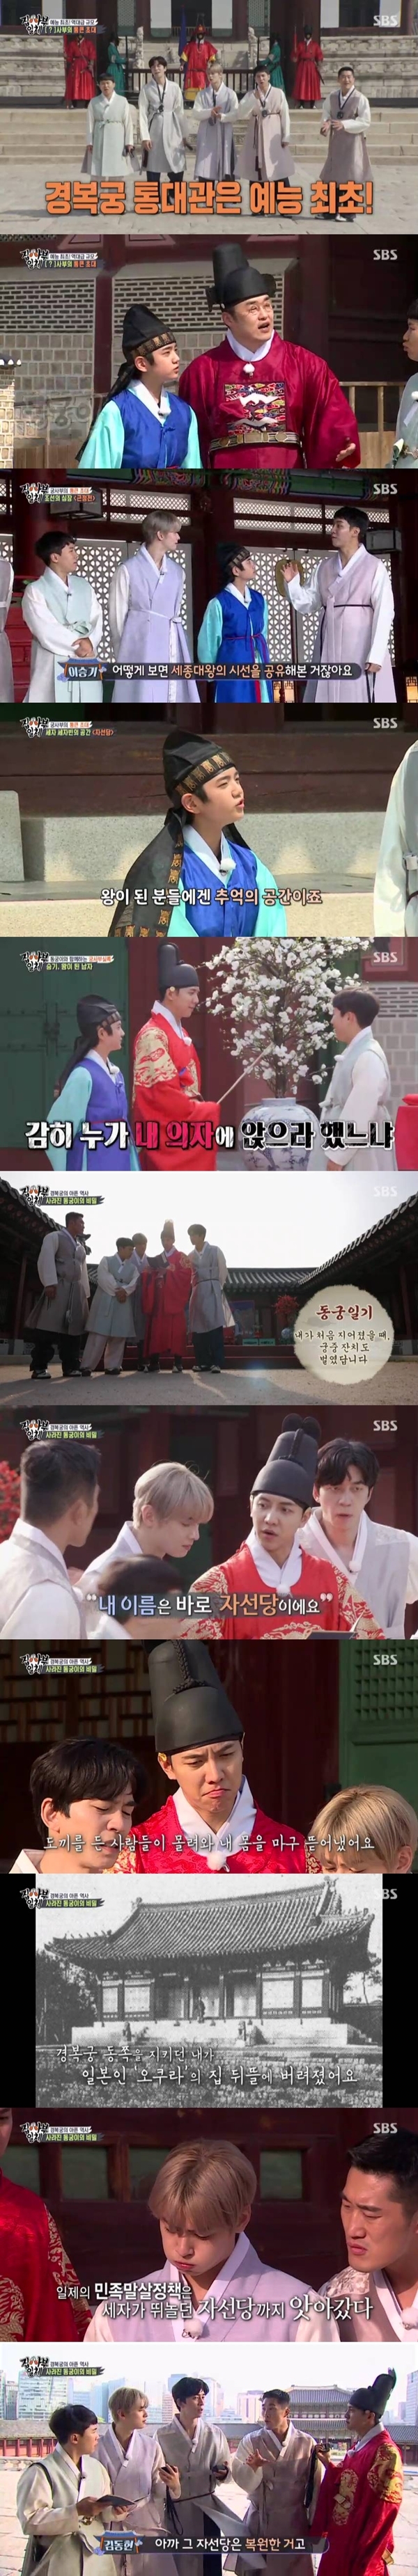 All The Butlers Gyeongbokgung appeared as a master and added meaning to the story of the poorly known Chest painful history.According to Nielsen Korea, a TV viewer rating agency on March 3, the TV viewer ratings of the Seoul metropolitan area of ​​the SBS entertainment program All The Butlers, which was broadcast the previous day, recorded 4.1% and 4% in the first part.Topic and competitiveness indicators, 2049 Target TV viewer ratings, rose 2.1% and the highest TV viewer ratings per minute rose to 5.5%.On this day, the master was Gyeongbokgung. The members seemed to be excited about the appearance of the first non-personal master of All The Butlers, saying, It seems to be the first and best master.In addition, Choi Tae-seong, a Korean history star lecturer, is in charge of history, and actor Kim Kang-hoon joined Goodbye My Princess.Especially, this filming was the first time that the entire Gyeongbokgung was licensed, and it was opened to the inside of the Geunjeongjeon and the second floor of the gyeonghoeru which can not be easily entered.Members looked back at Gyeongbokgung following Choi Tae-seong and Goodbye My Princess.Choi Tae-seong said: If you look well there are stories of many people who lived here in the building.I think meeting the story is the will of Master Gyoungbokgung. Members looked inside the Geunjeongjeon and from gyeonghoeru to the Charity Party and the Guncheong Palace.Choi Tae-seong explained that Chest painful Empress Myeongseong was a space where the incident occurred, and the members said, Suddenly Chest is sick.Goodbye My Princess also said, I think it was too scary, I learned it from textbooks, but its even worse when I come.Lee Seung-gi said, I thought it was a splendid place with a king, but eventually it was like a place where people live.While spending time at Gyongbokgung, Goodbye My Princess with the members suddenly disappeared and embarrassed everyone.At this time, an unrelated person appears with a diary of Goodbye My Princess, Please find Goodbye My Princess with these clues.Goodbye My Princess must be in gyeongbokgung. The diary read, I am called Goodbye My Princess because it is a palace built in 1427 and a palace in the east.The members found out that Goodbye My Princess is not a person but a charity party.The members followed the diary clues to the charity party, where a second diary was placed in front of the charity party, which contained a shocking past that the Japanese auctioned Gyoungbokgung.The members said, Fire and 100 years ago, and they could not easily say, I did not know that Gyeongbokgung was auctioned and torn it to Japan.Since then, the members have been looking for the original charity hall and heading to the backyard of the palace, but there was only a place left.Choi Tae-seong told the Chest sick story of the philanthropy being reduced to a Japanese private art museum as the gyeongbokgung pavilions were auctioned off.In 1923, the Kanto earthquake caused the charity to eventually disappear into a fire.Professor Kim Jung-dong, who tried to rebuild his bitter history without forgetting it, told the back story that he was able to return the neglected stone to Gyongbokgung.In addition, Choi Tae-seong told everyone that the backyard of the Guncheong Palace, which moved the charitable hall, was a place where Empress Myeongseong was buried and burned.Shin Sung-rok said, If we did not know this, we would just see it even if we came to Gyongbokgung.Choi Tae-seong said, Before the stonework of the charity party came back, the history of the charity party was erased.I recovered this, and because I put it back, I restored the story of the charity party. It is our mission to restore the lost history by finding one by one, restoring the lost story, and to pass on to the future.This is the teaching of Master Gyeongbokgung, he said.Following the painful history of Chest, which was hidden on this day, the scene of the teachings of Master Gyeongbokgung reminded me of the meaning and took the best one minute with 5.5% of TV viewer ratings per minute.